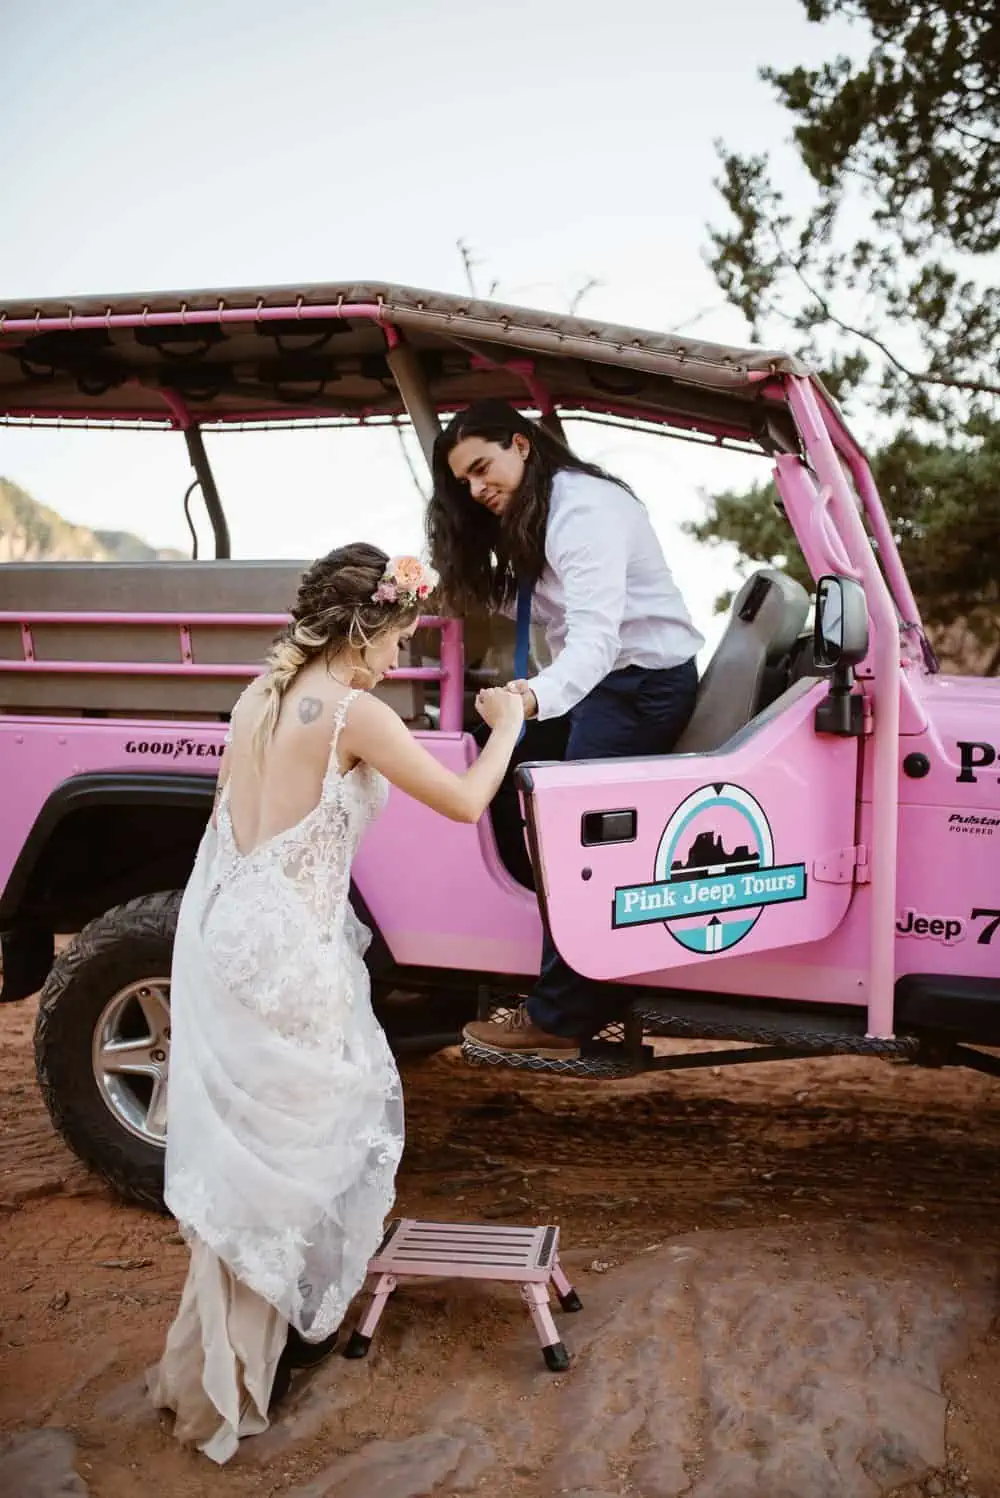 A groom helps his bride into a the jeep.